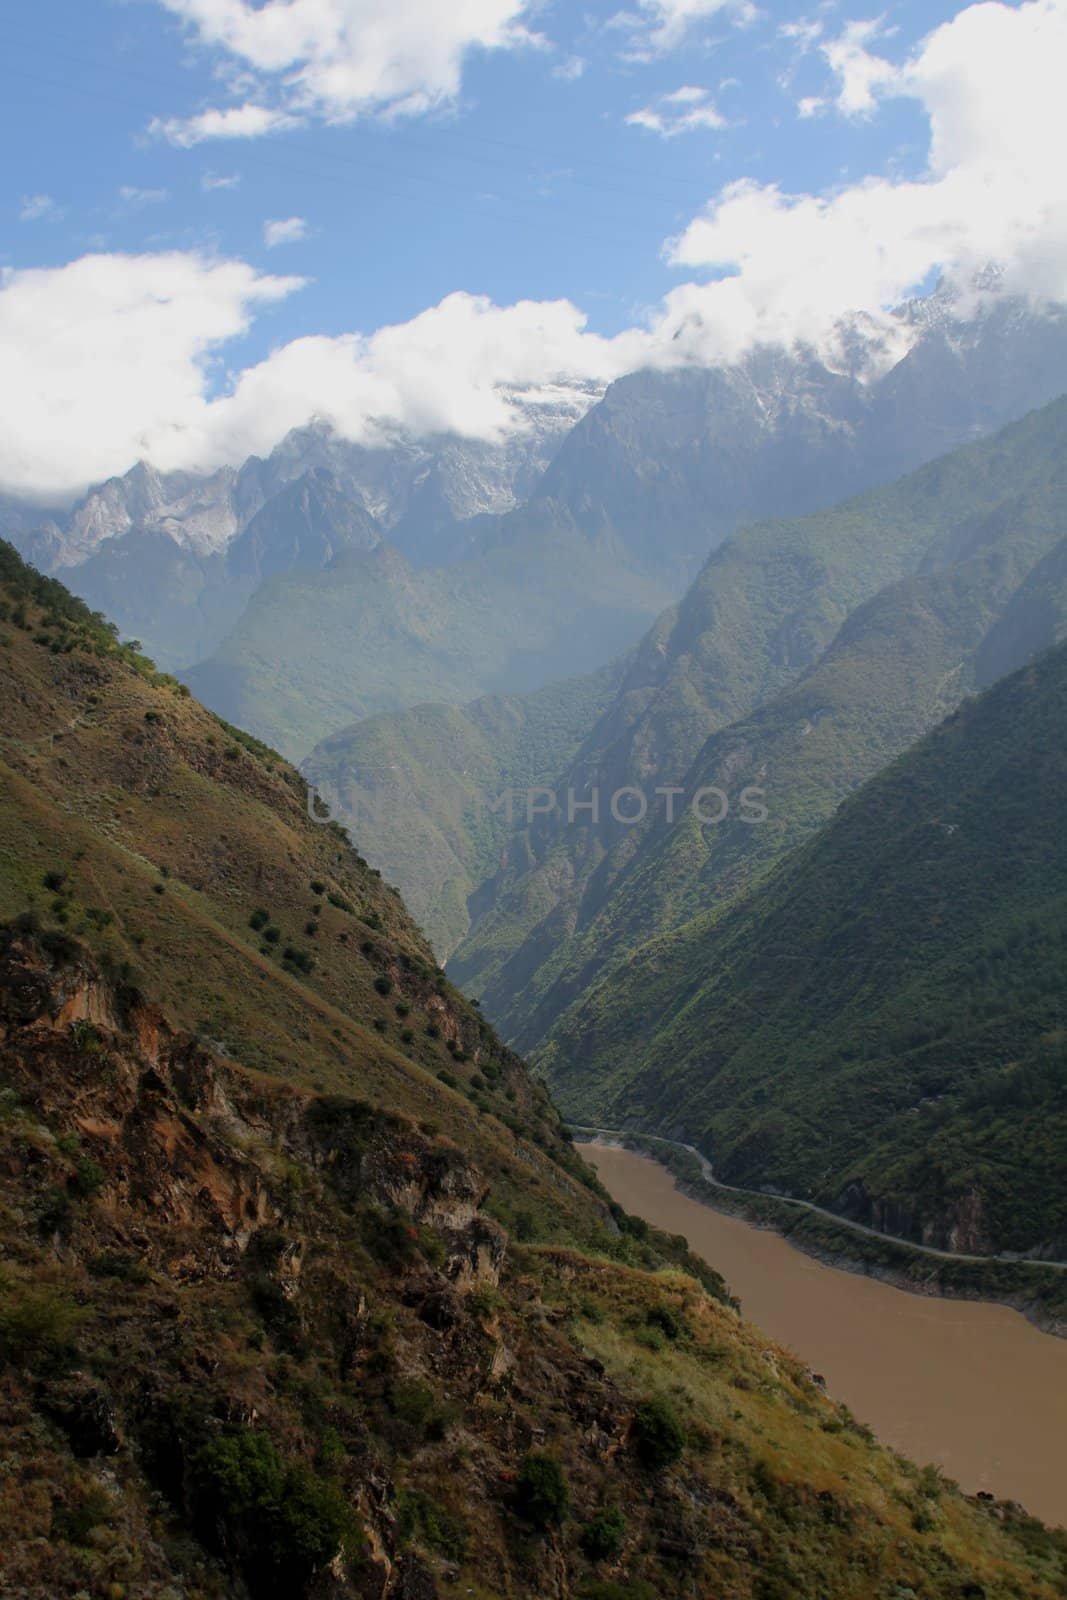 View of the Tiger Leaping Gorge, on of the most spectacular trekking in all China